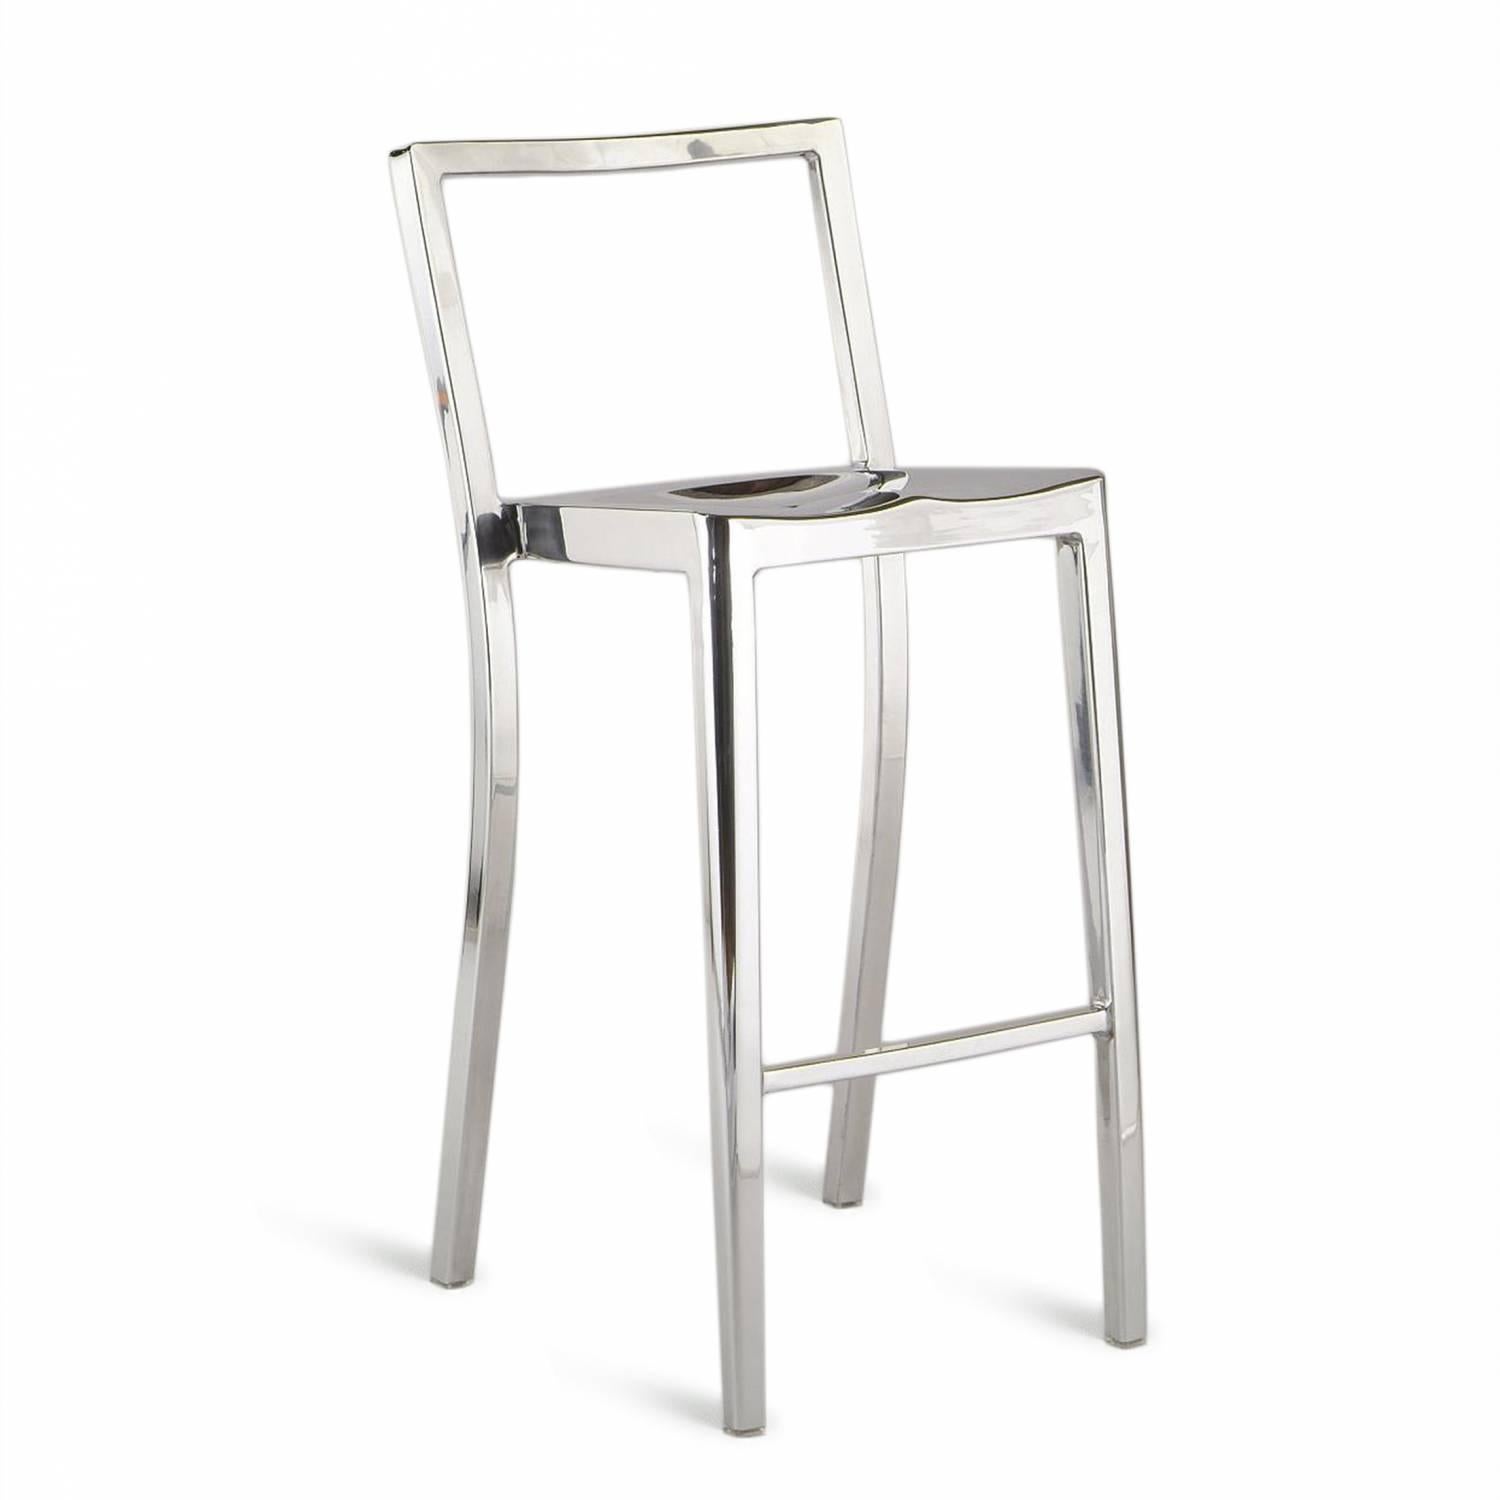 Icon is a stacking chair cousin to the famous Starck designed Hudson chair. It has been used in hotels, bars and restaurants worldwide, as well as training centers, meeting areas and schools. Starck describes Icon as “the chair I see when I close my